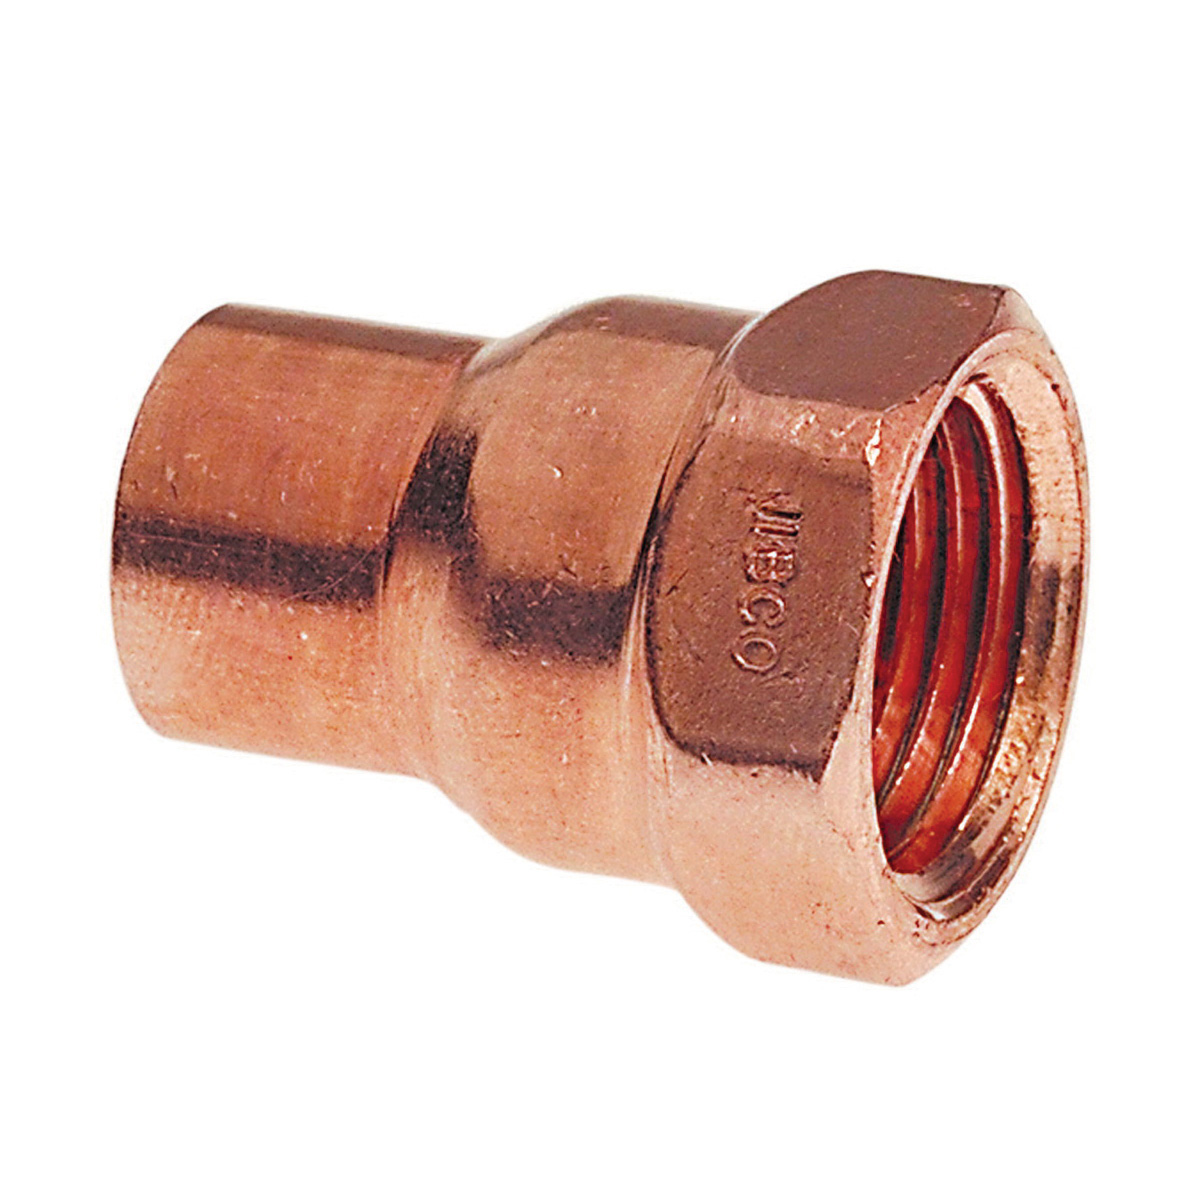 NIBCO® 9026150 603 Adapter, 2 in Nominal, C x FNPT End Style, Copper, Domestic